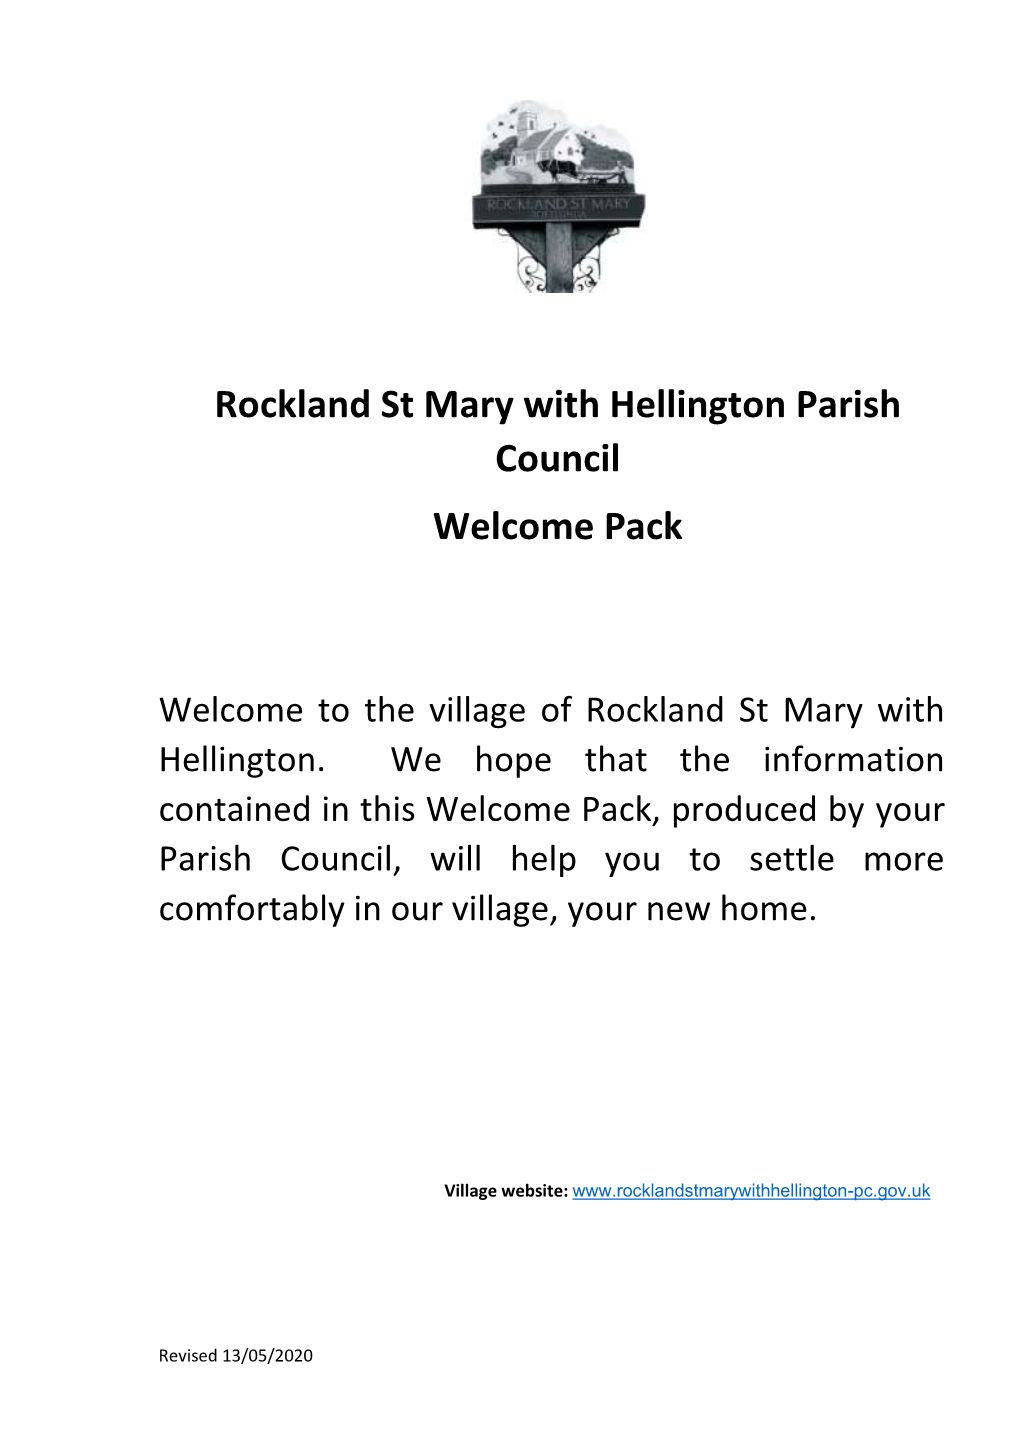 Rockland St Mary with Hellington Parish Council Welcome Pack